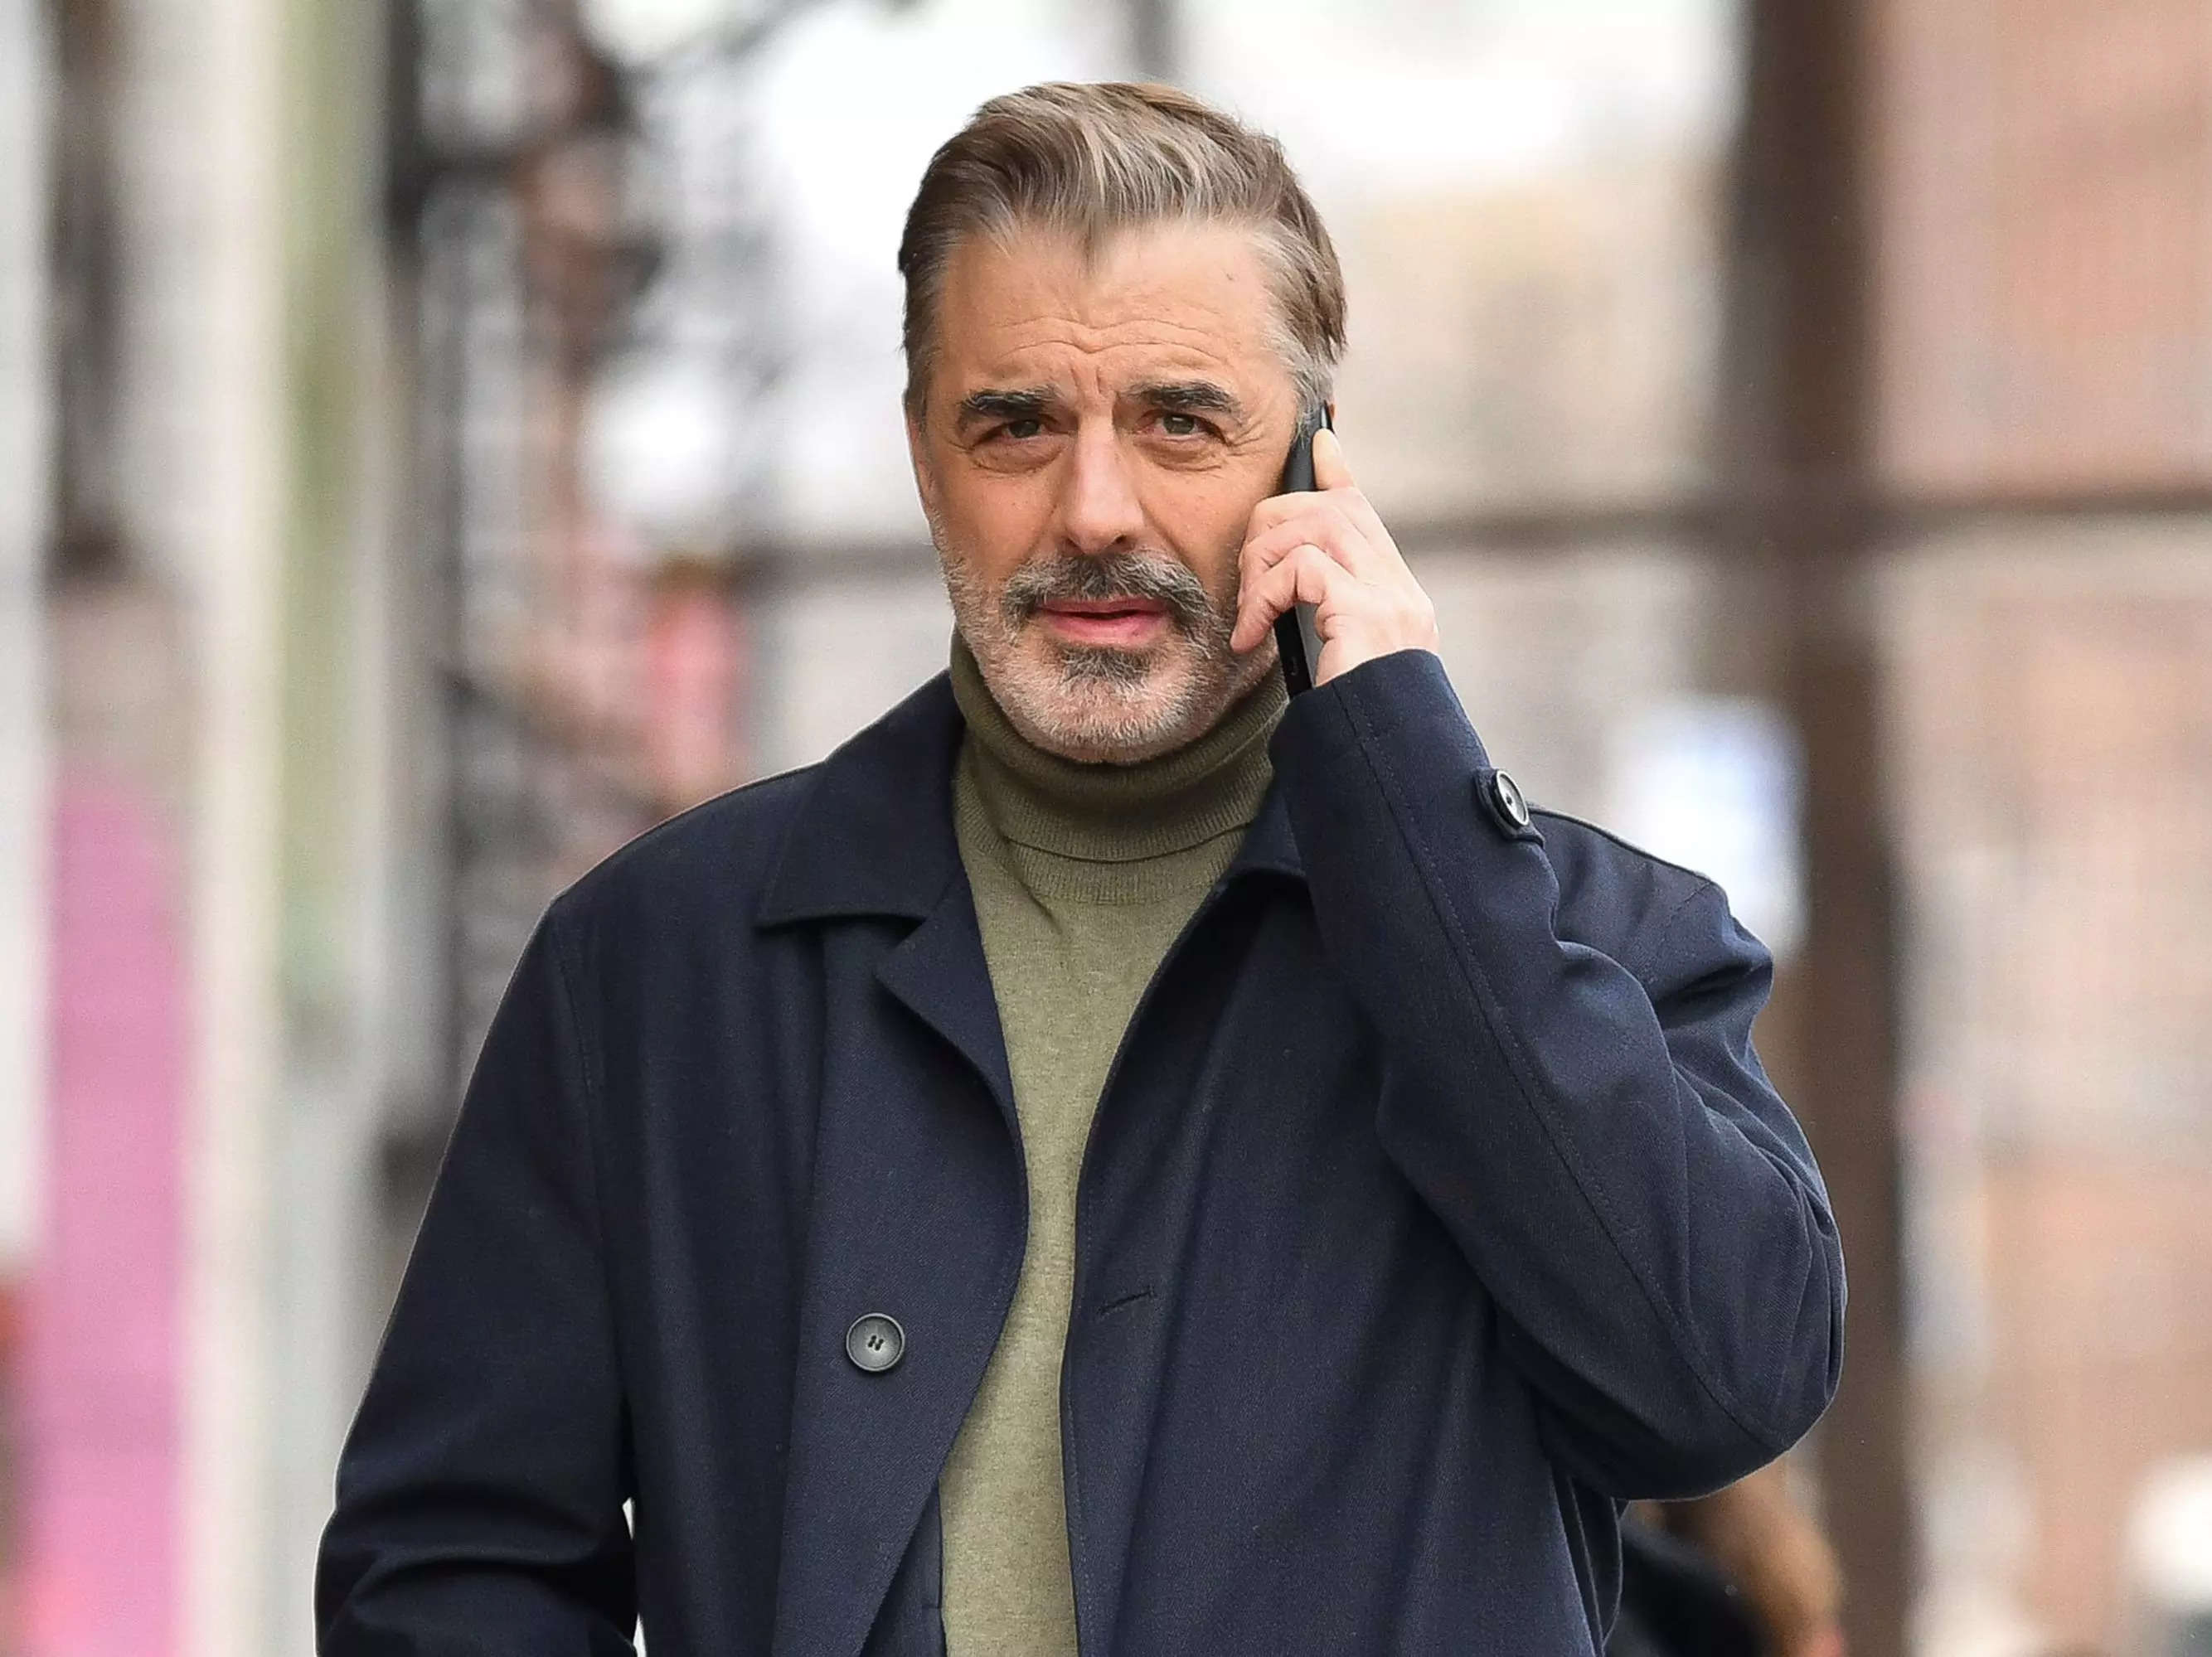 Sex And The City Star Chris Noth Teases A Possible Return And Suggests Mr Big May Be Haunting 1257